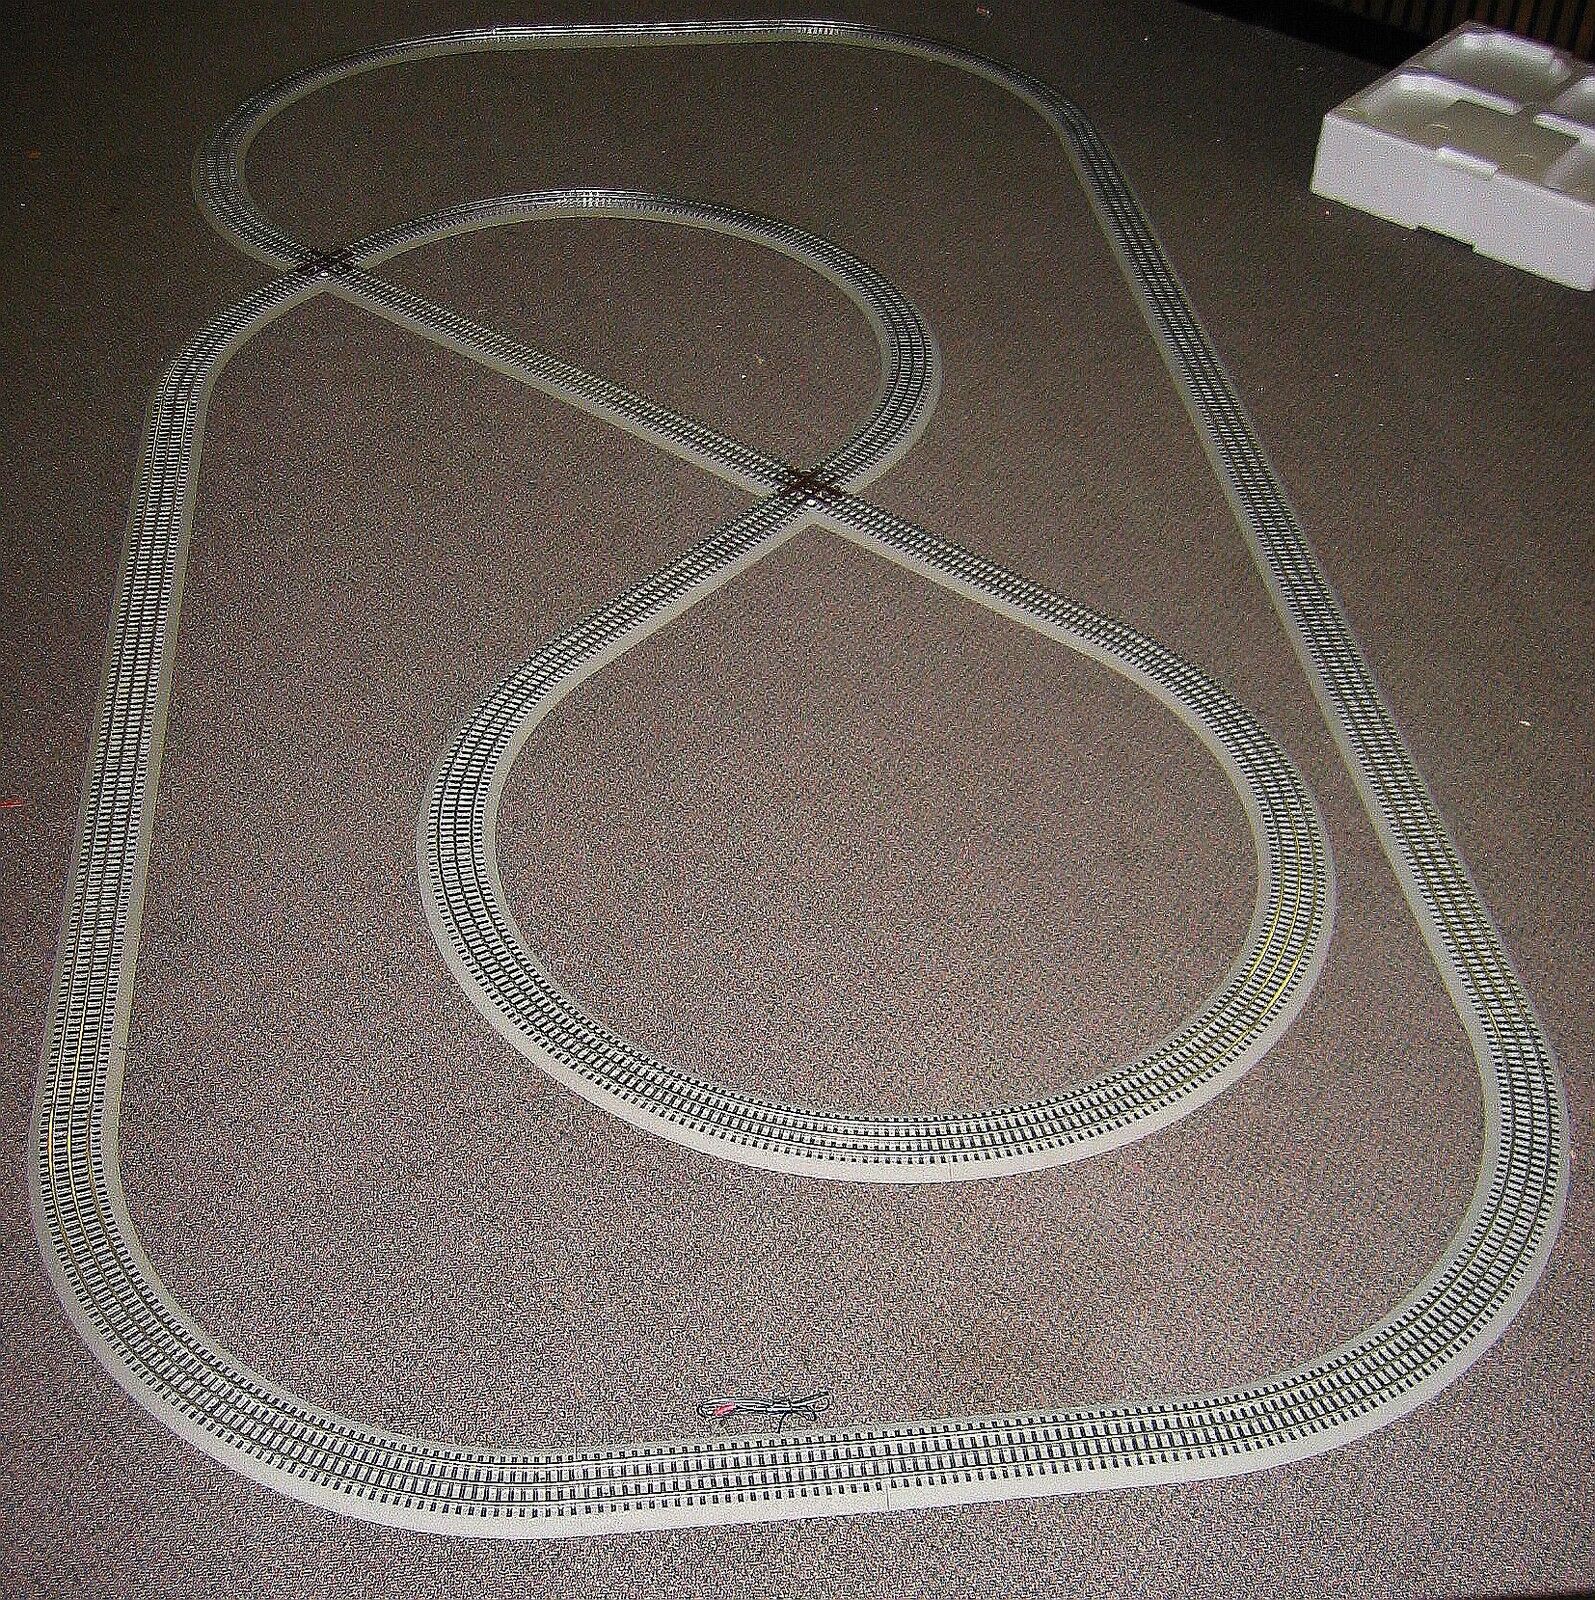 LIONEL TRAIN DELUXE FASTRACK PACK 5X10 FEET Layout Display Set w/Track Crossings